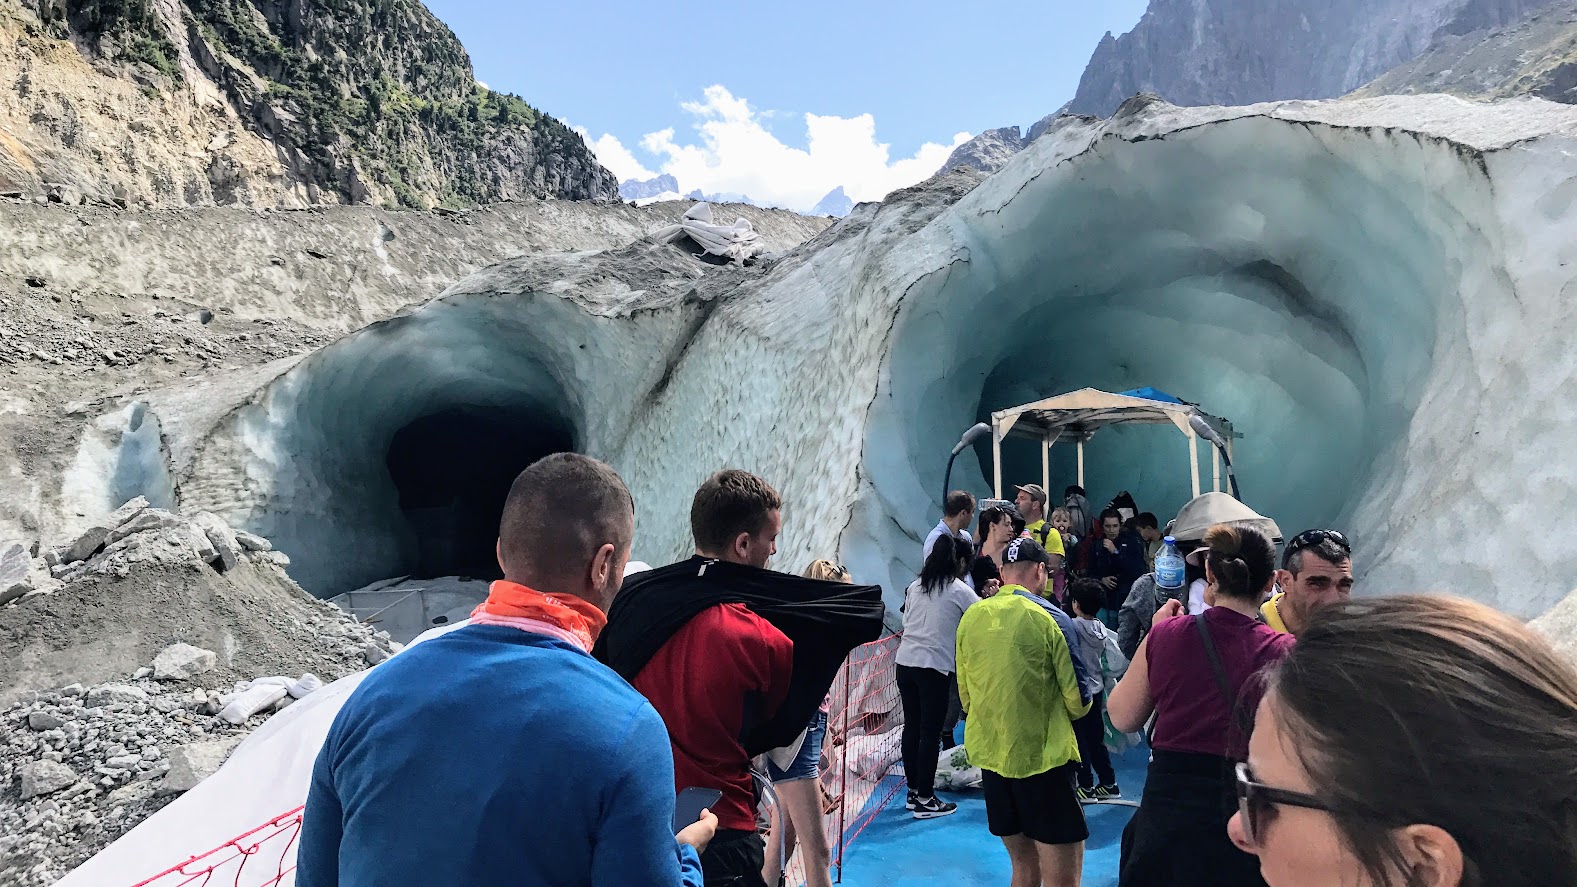 Entrance of the Ice Cave